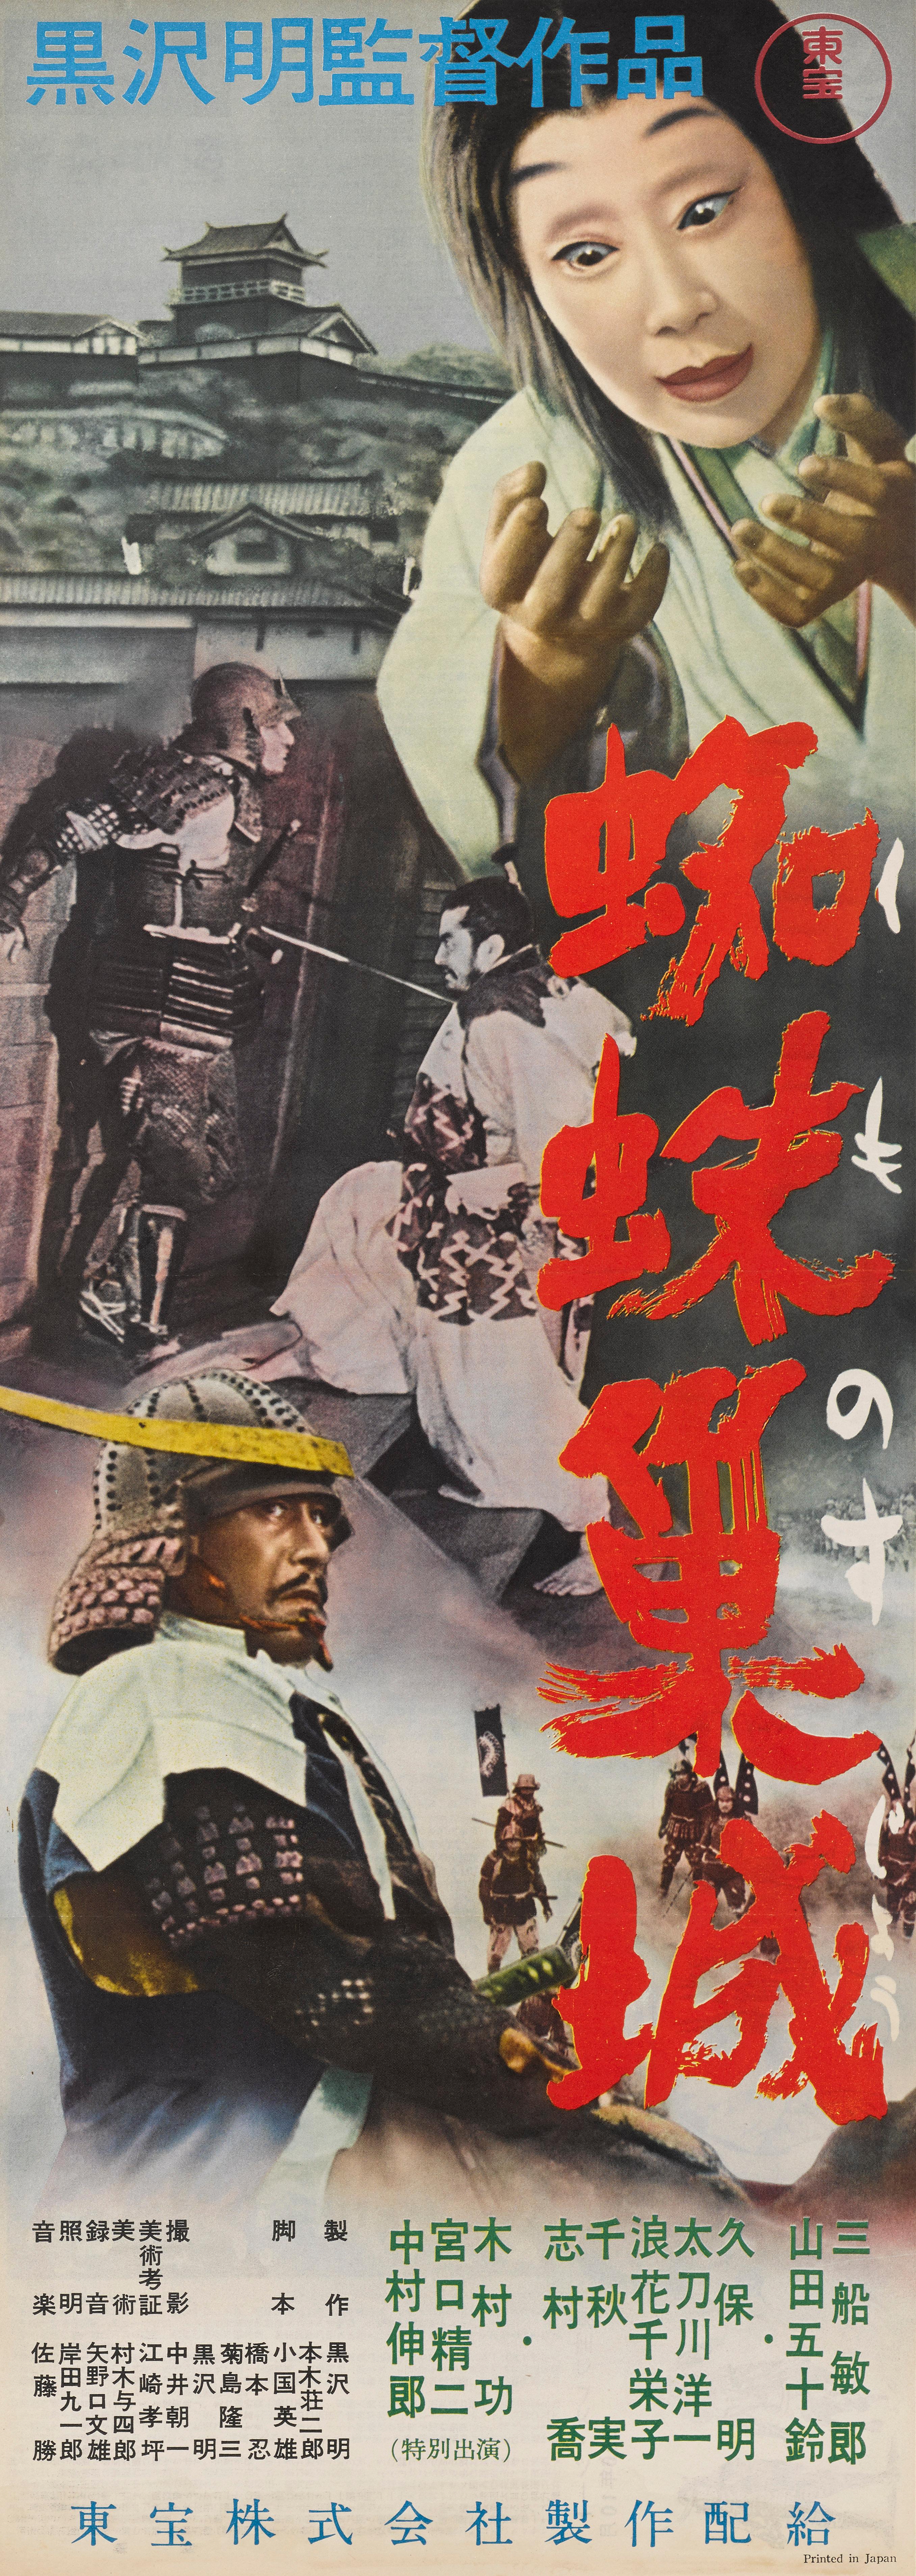 Original Japanese movie poster for the 1957 war, drama directed Akira Kurosawa and starring Toshiro Mifune.
The film is a brilliant adaptation of William Shakespeare's Macbeth.
This poster is conservation paper backed and would be shipped flat by